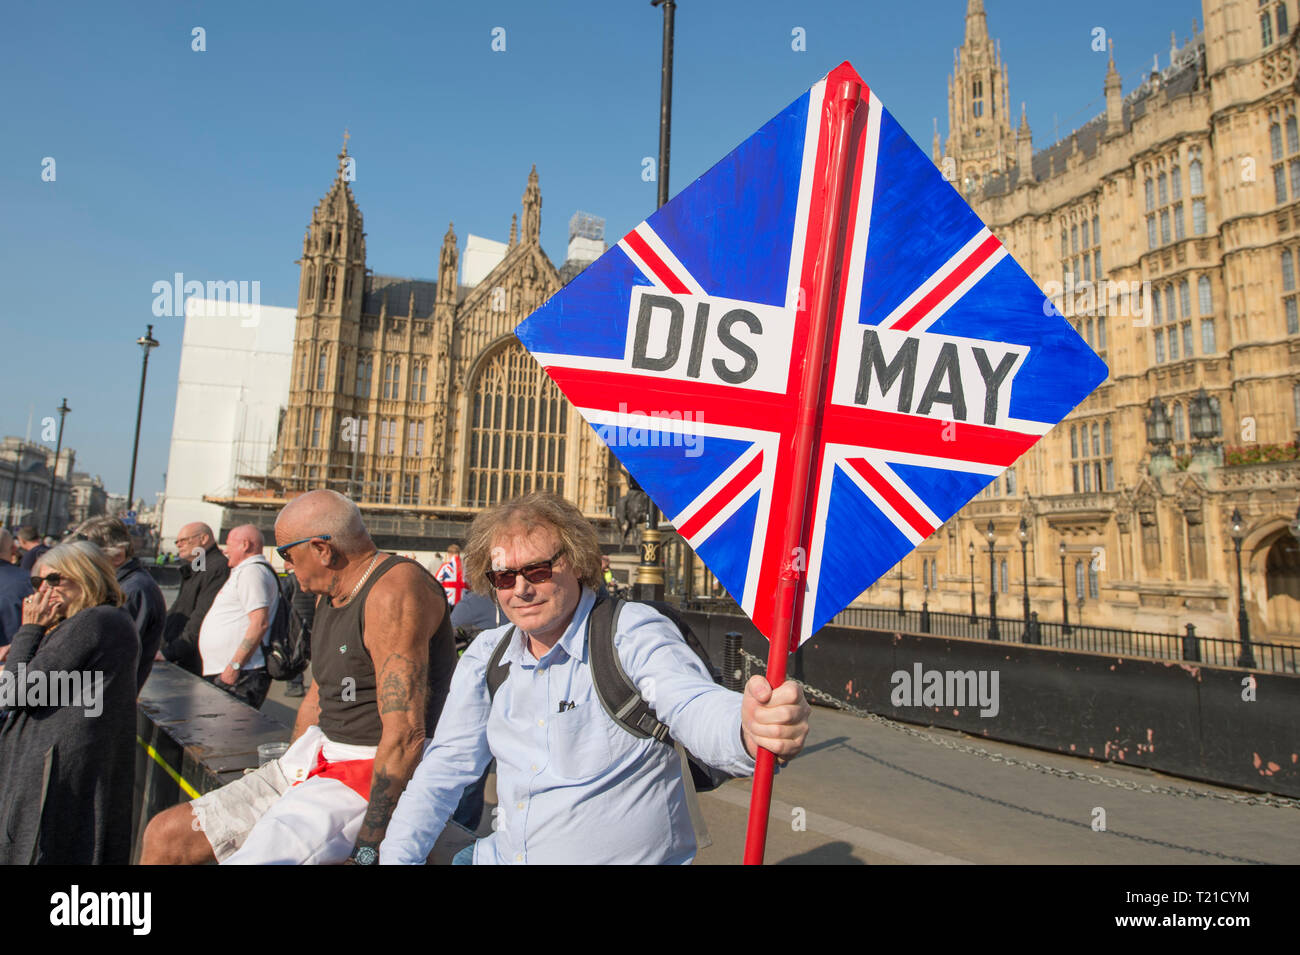 Westminster London, UK. 29 March, 2019. Thousands of Leave supporters gather outside Parliament as MPs reject the Prime Minister’s withdrawal deal by 58 votes. March to Leave rally gathers in Parliament Square to hear Nigel Farage speak. A separate Make Brexit Happen rally takes place in Whitehall, organised by UKIP with EDL’s Tommy Robinson. Credit: Malcolm Park/Alamy Live News. Stock Photo